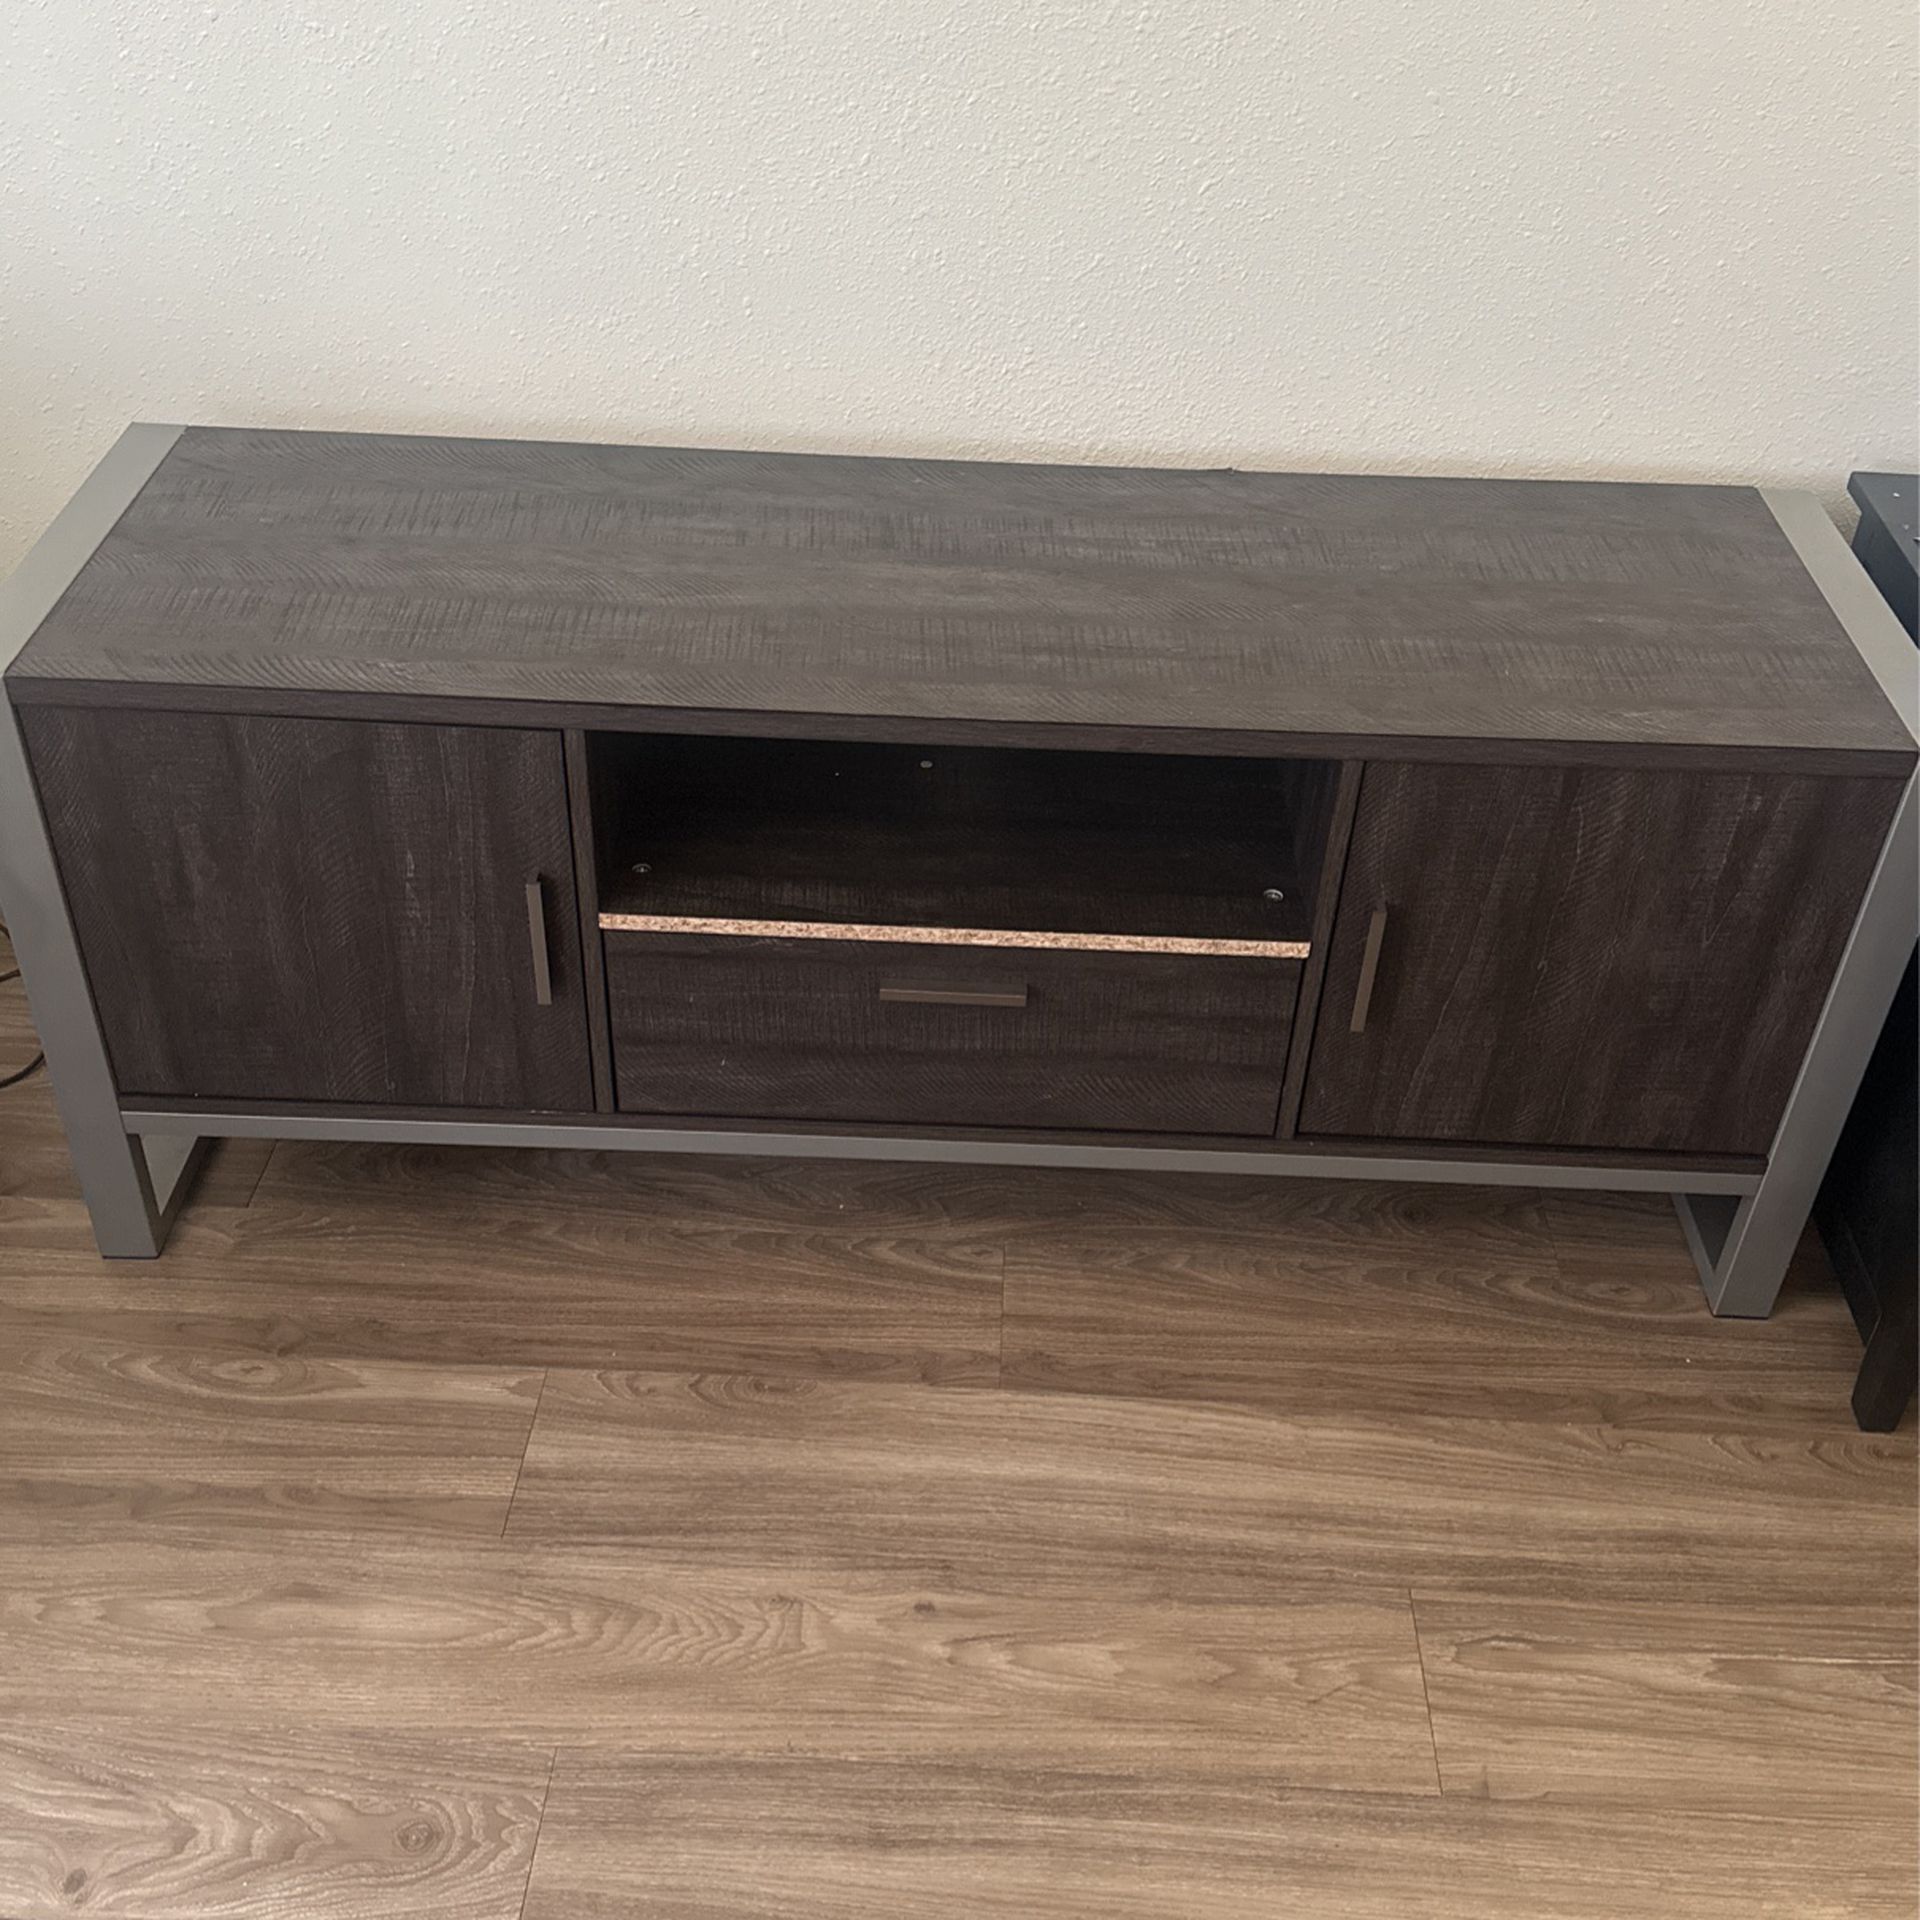 TV Stand 50 inches